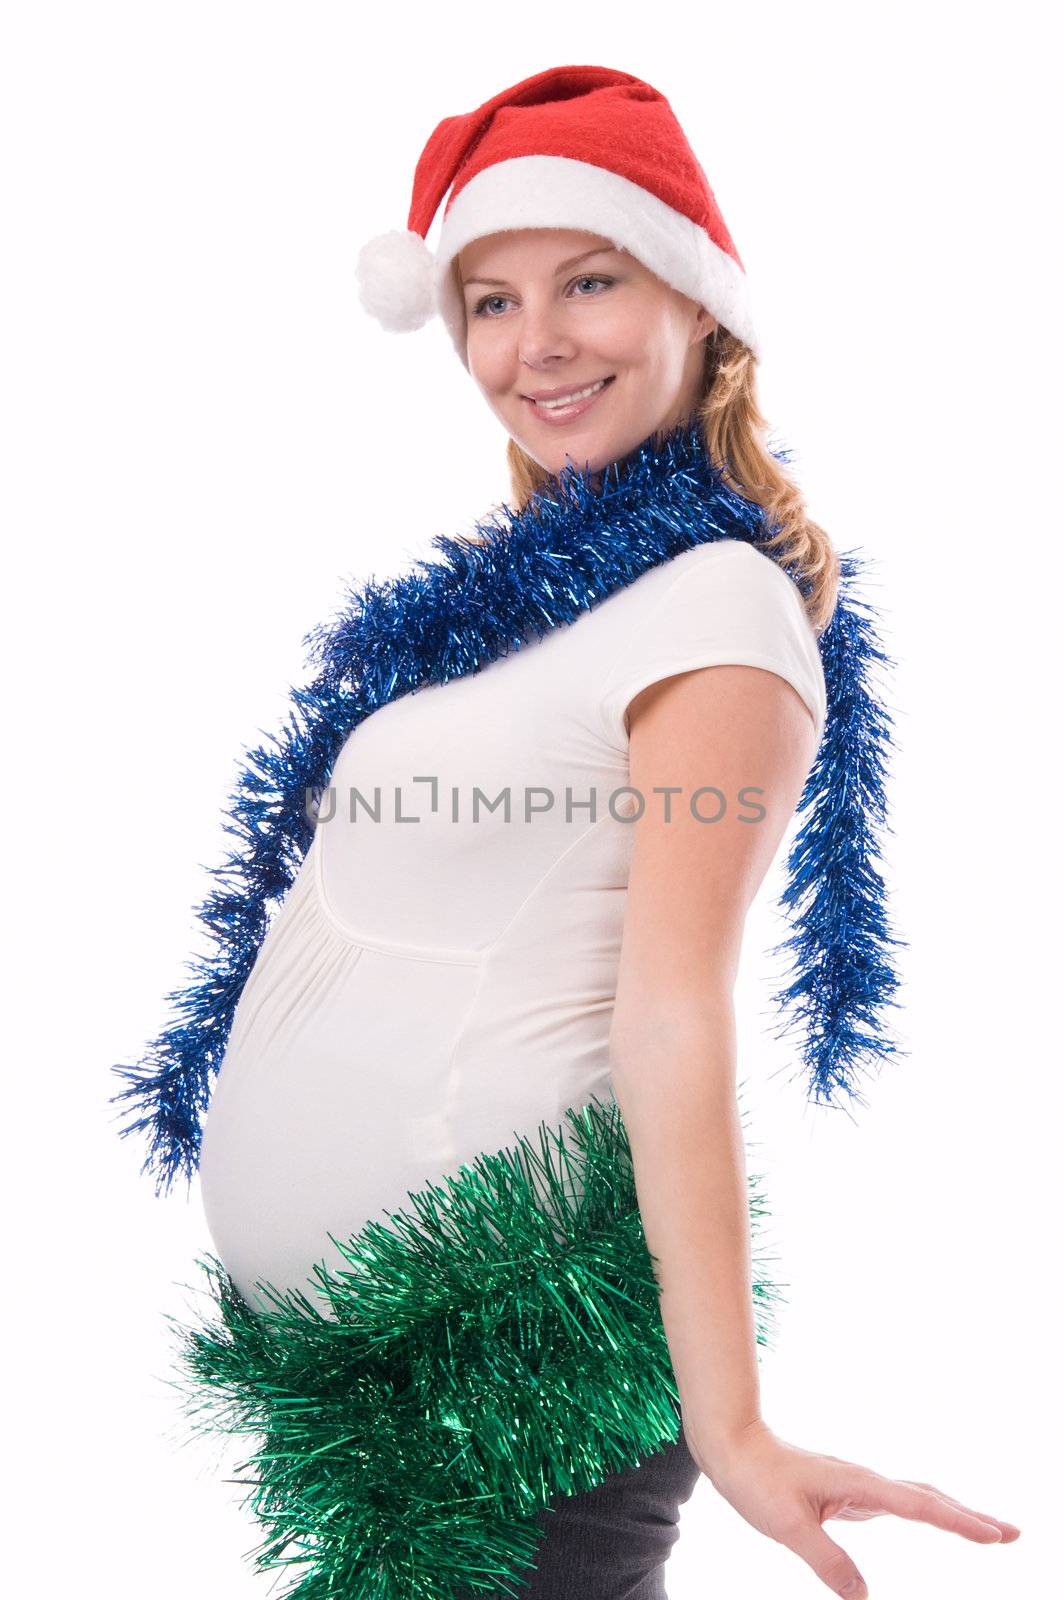 The pregnant woman in a suit of a Snow Maiden